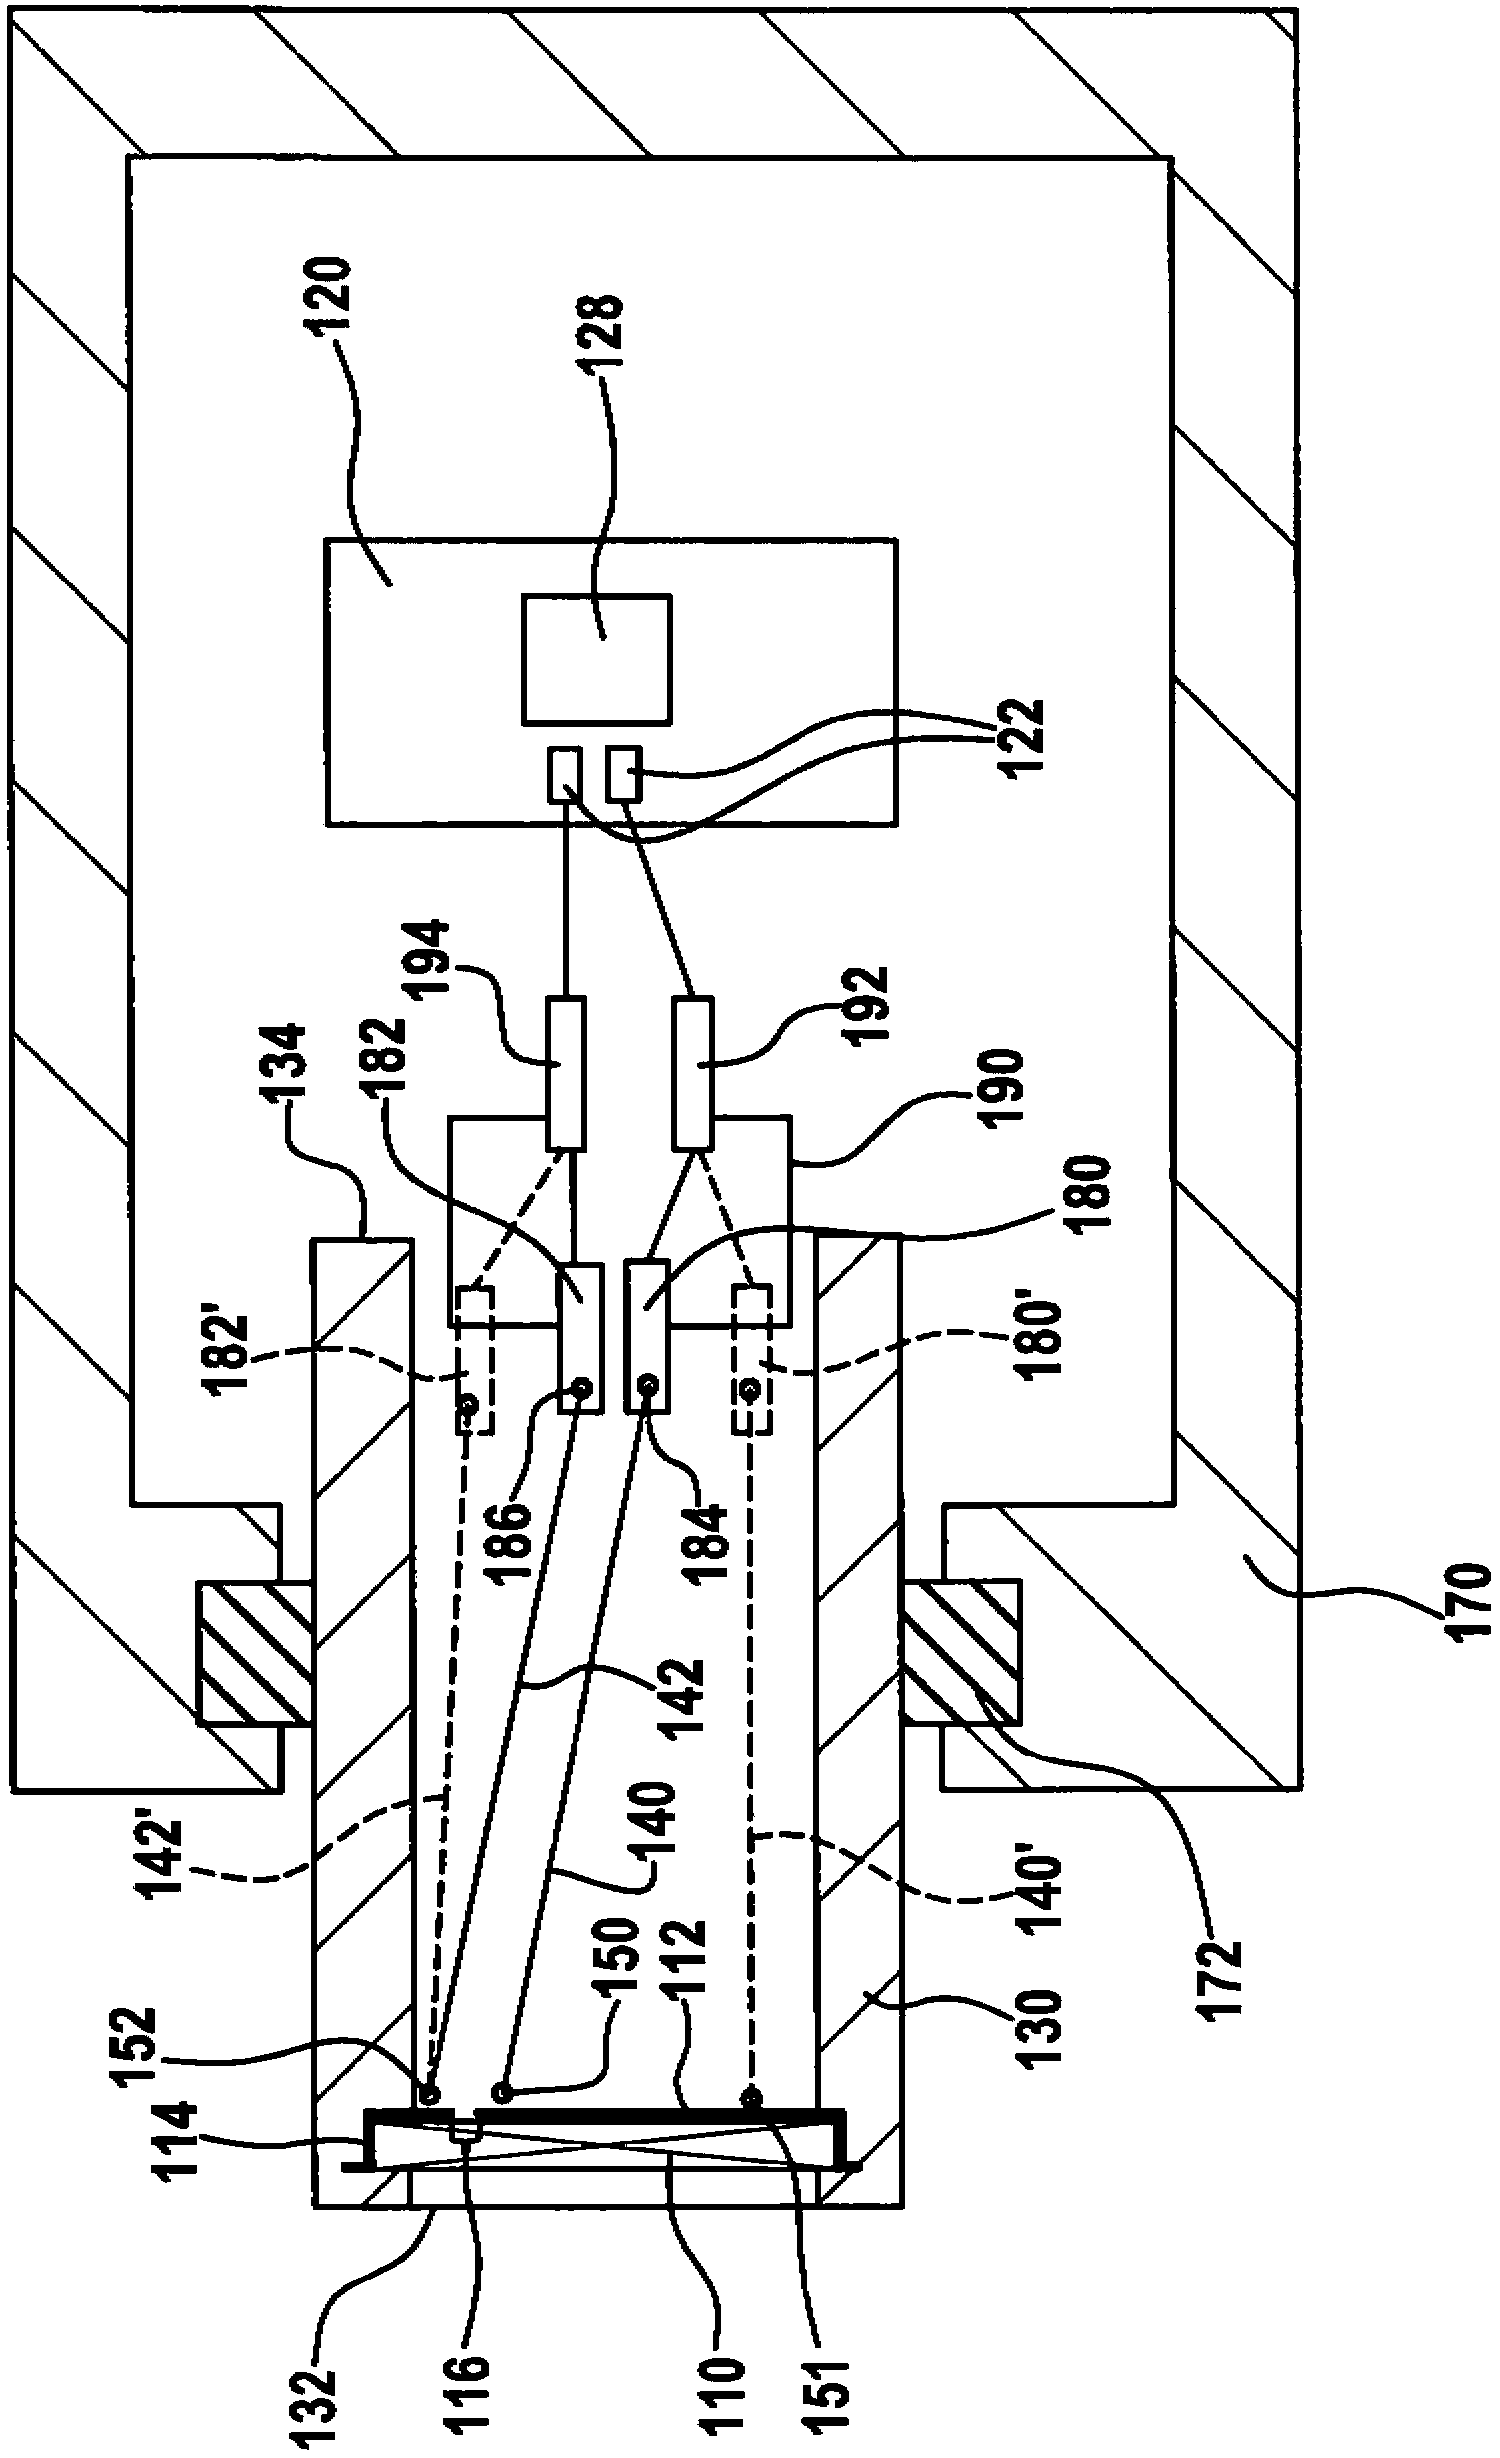 Ultrasonic transducer with piezoelectric element and distance sensor